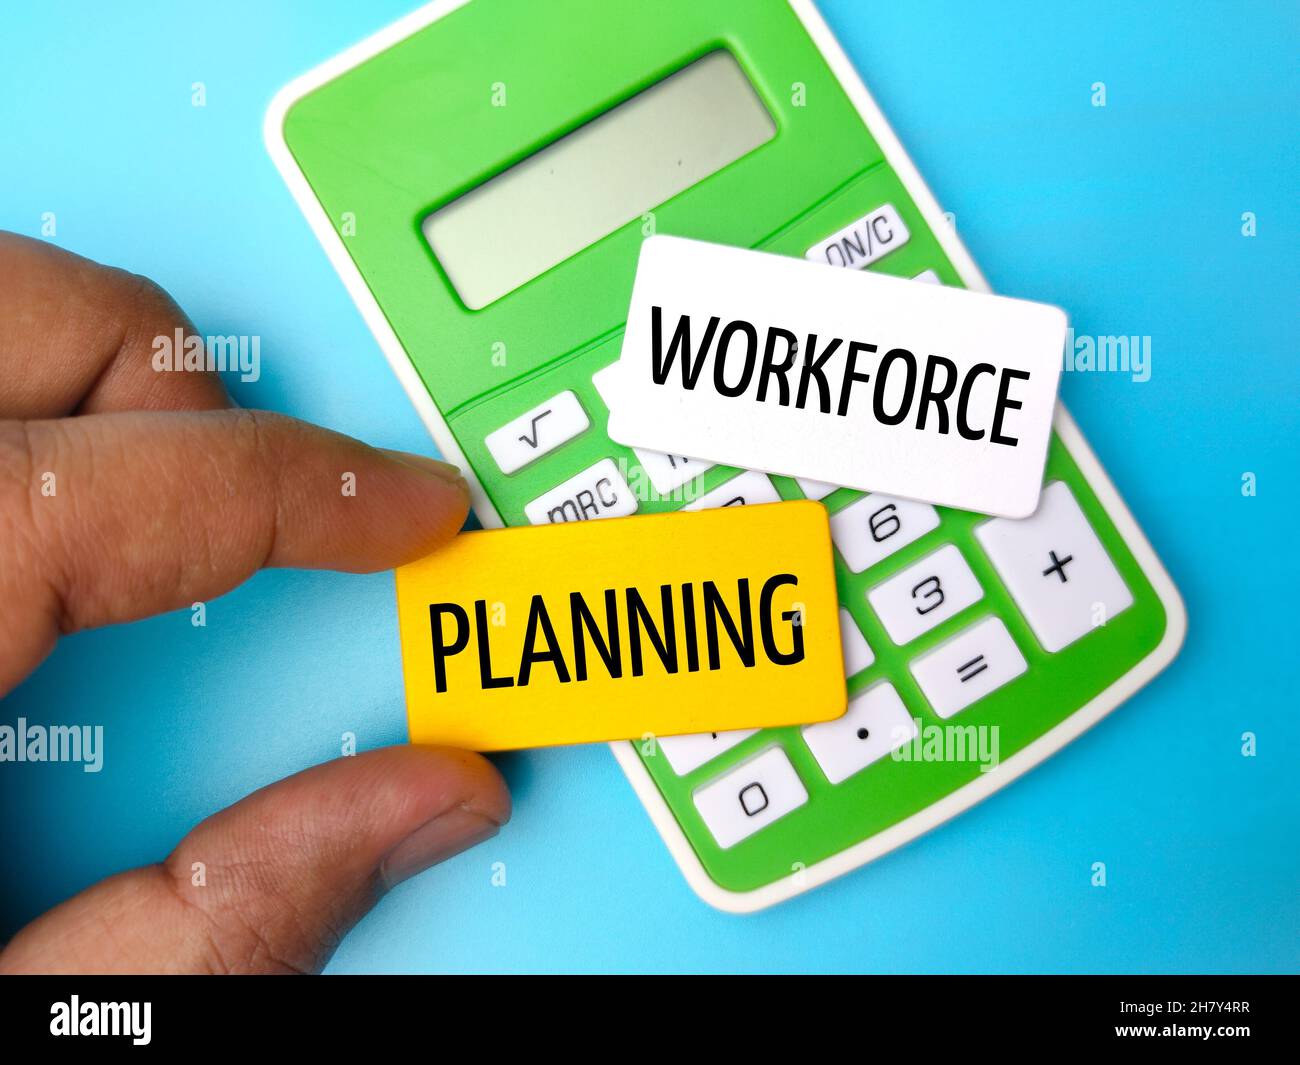 Calculator and hand holding colored wooden board with the word WORKFORCE PLANNING. Stock Photo